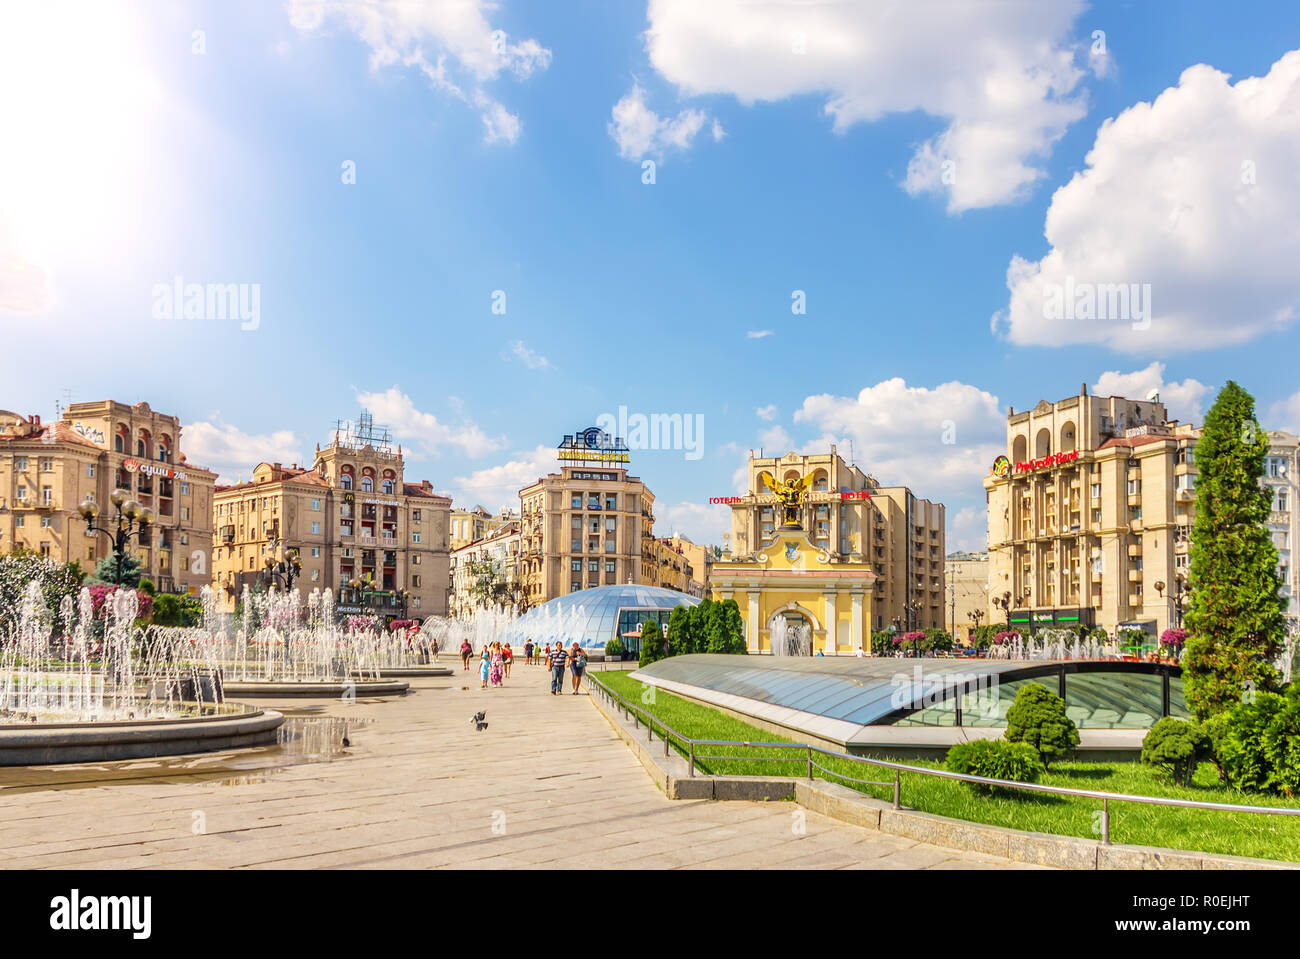 Kiev, Ukraine - August 15, 2018: Independence Square fountains, and buildings and Lach Gates in summer Stock Photo